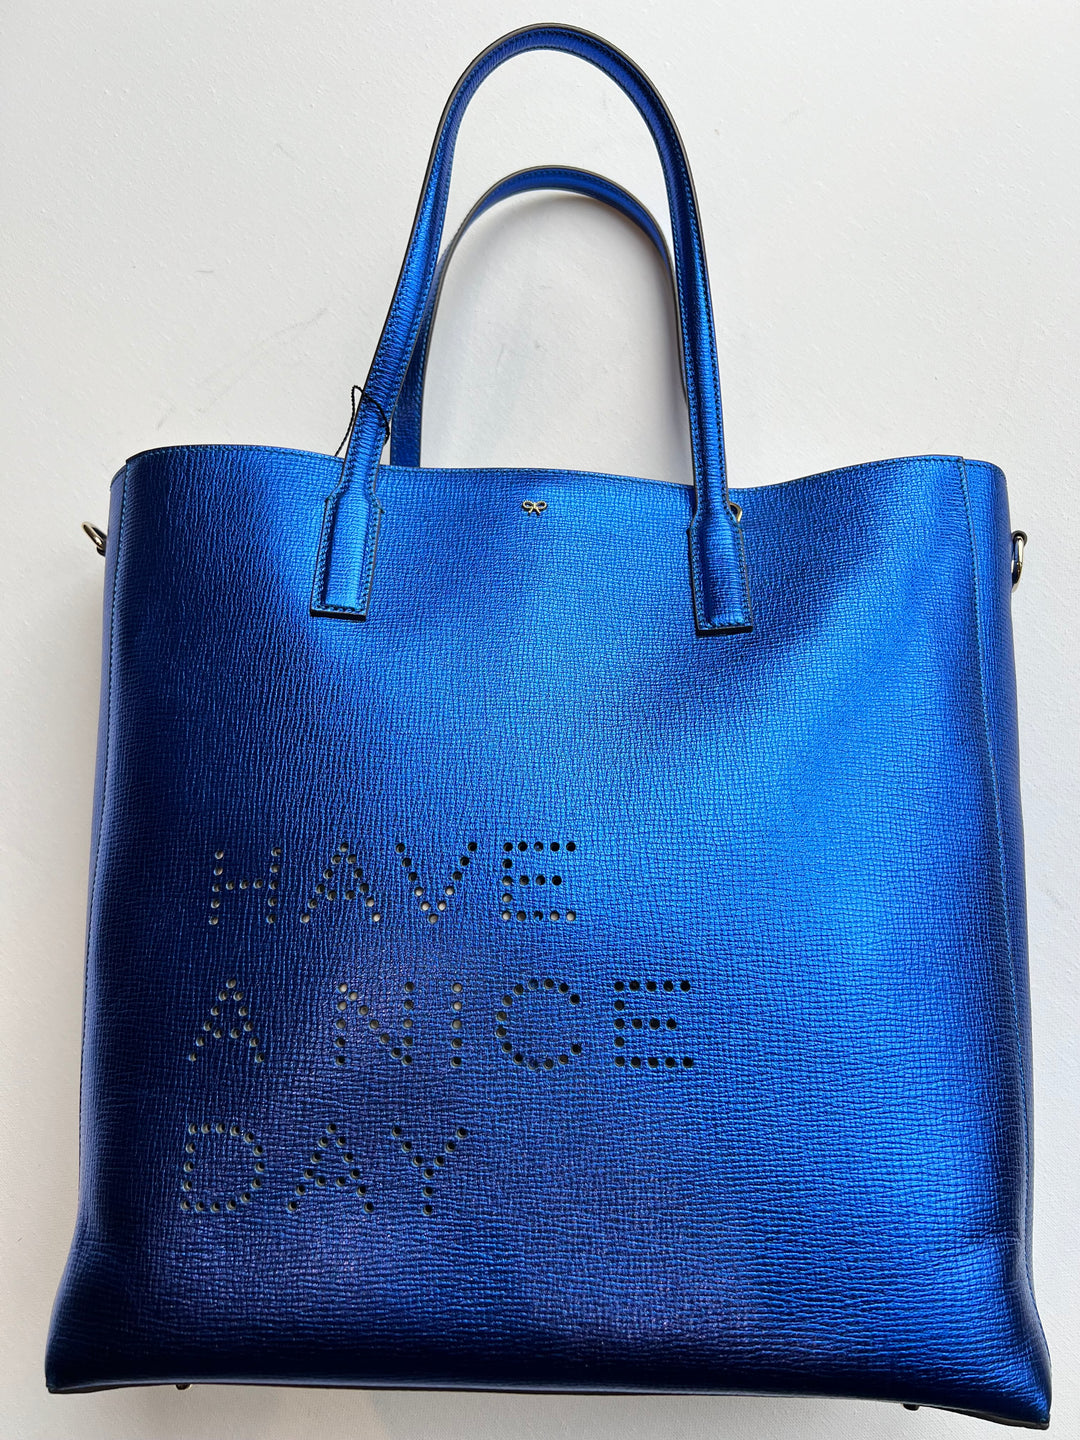 Anya Hindmarch Have A Nice Day Tote